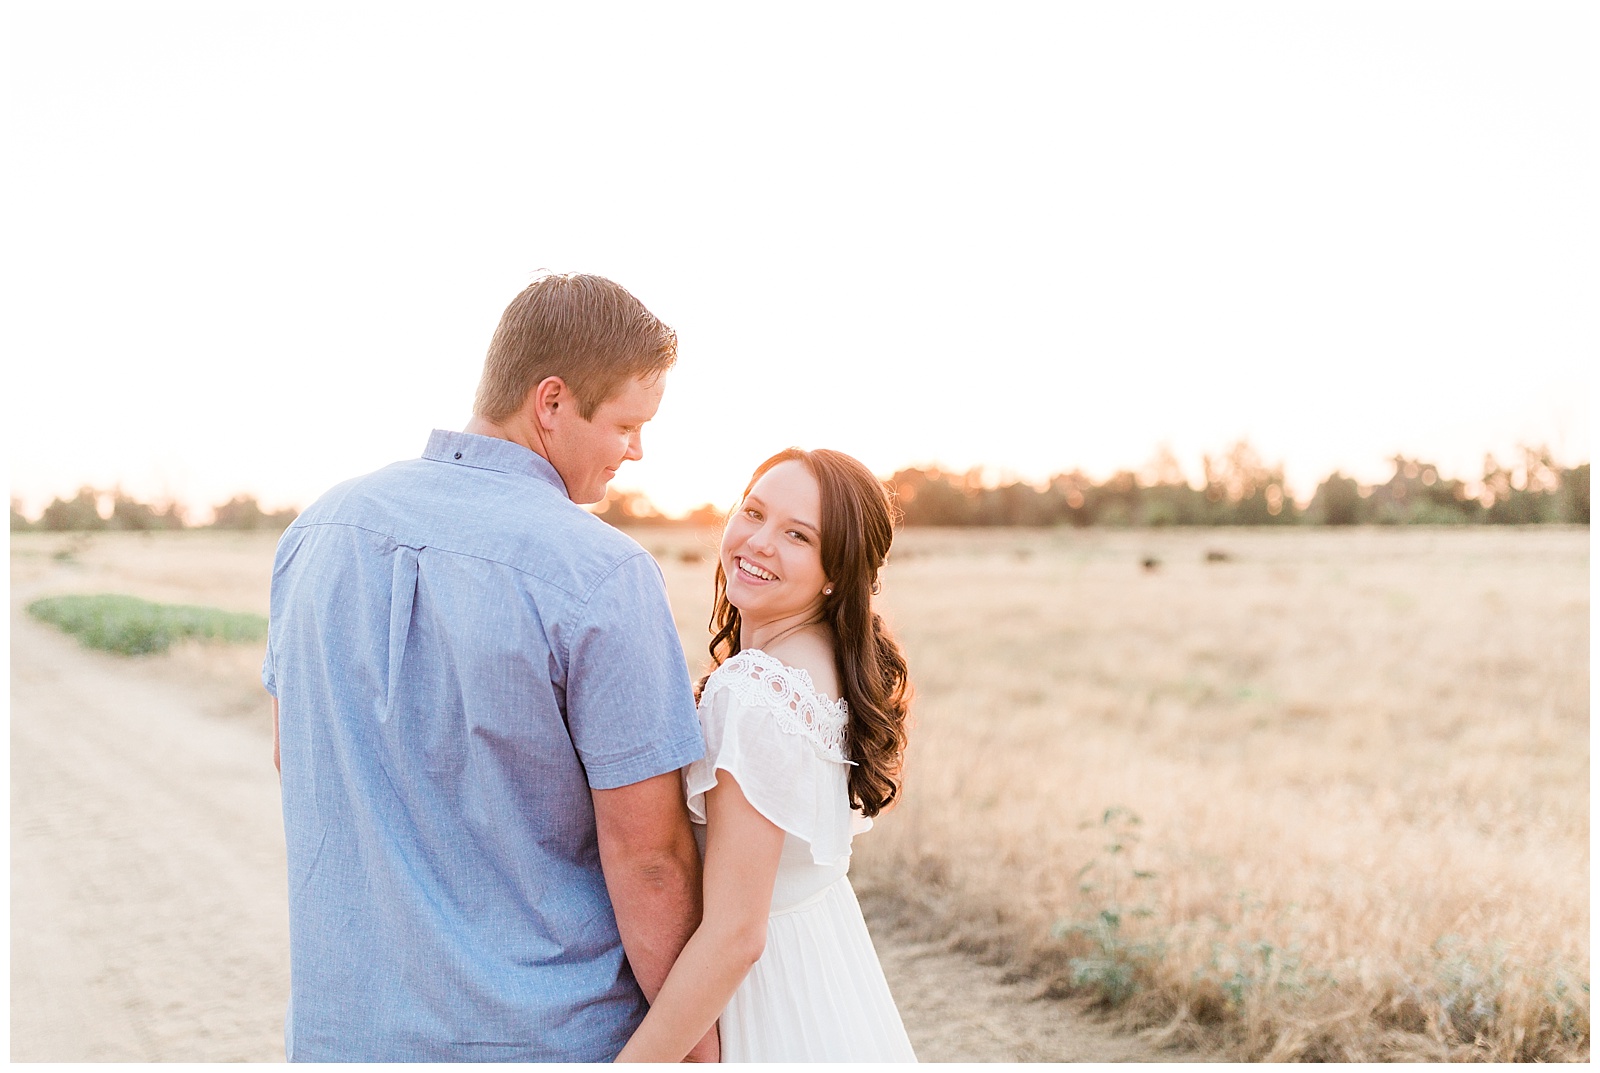 rustic country engagement photos at sunset with megan helm a fresno wedding photographer